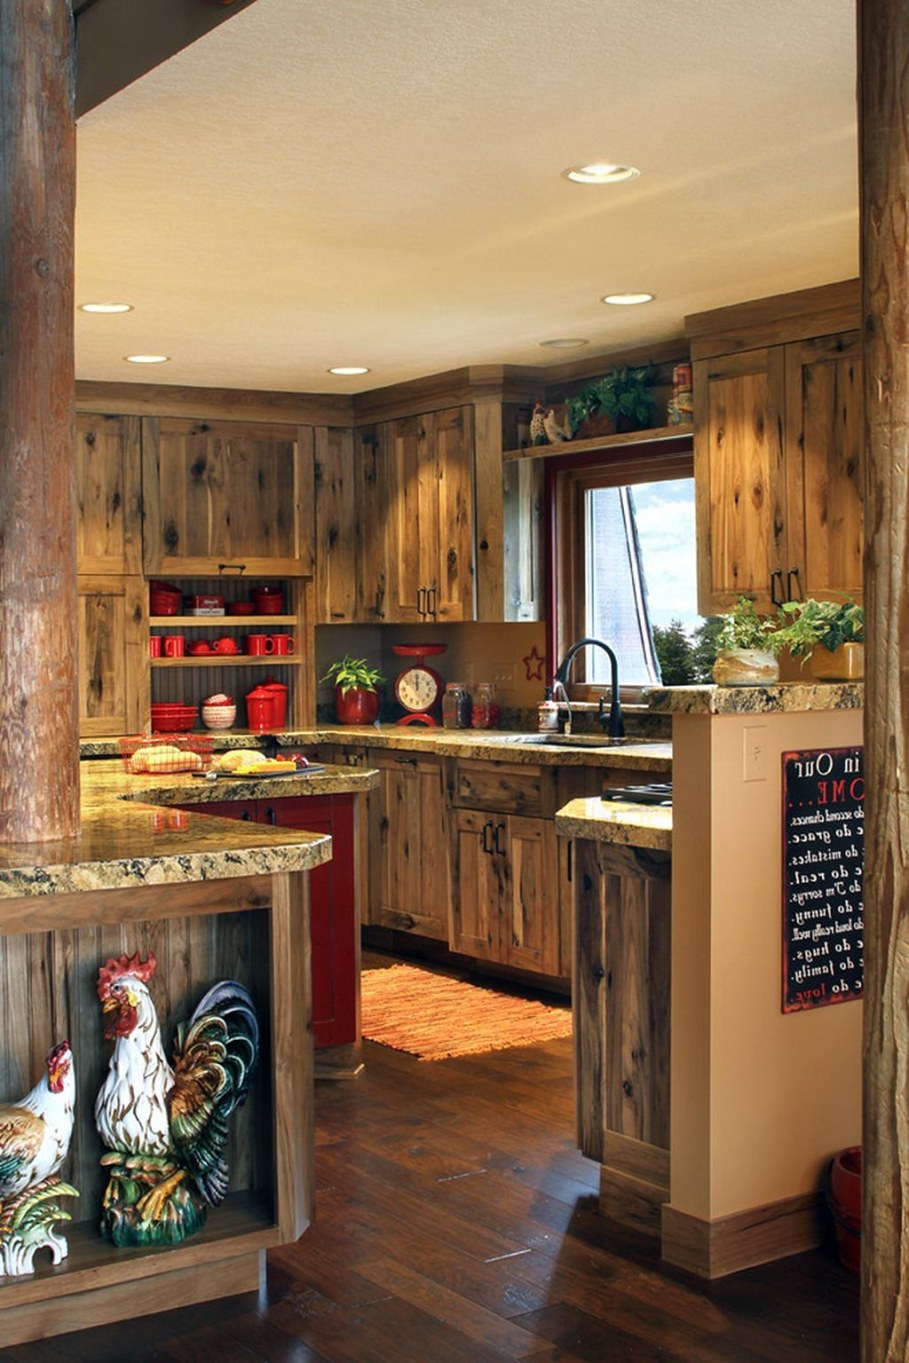 Kitchen in country style - design ideas